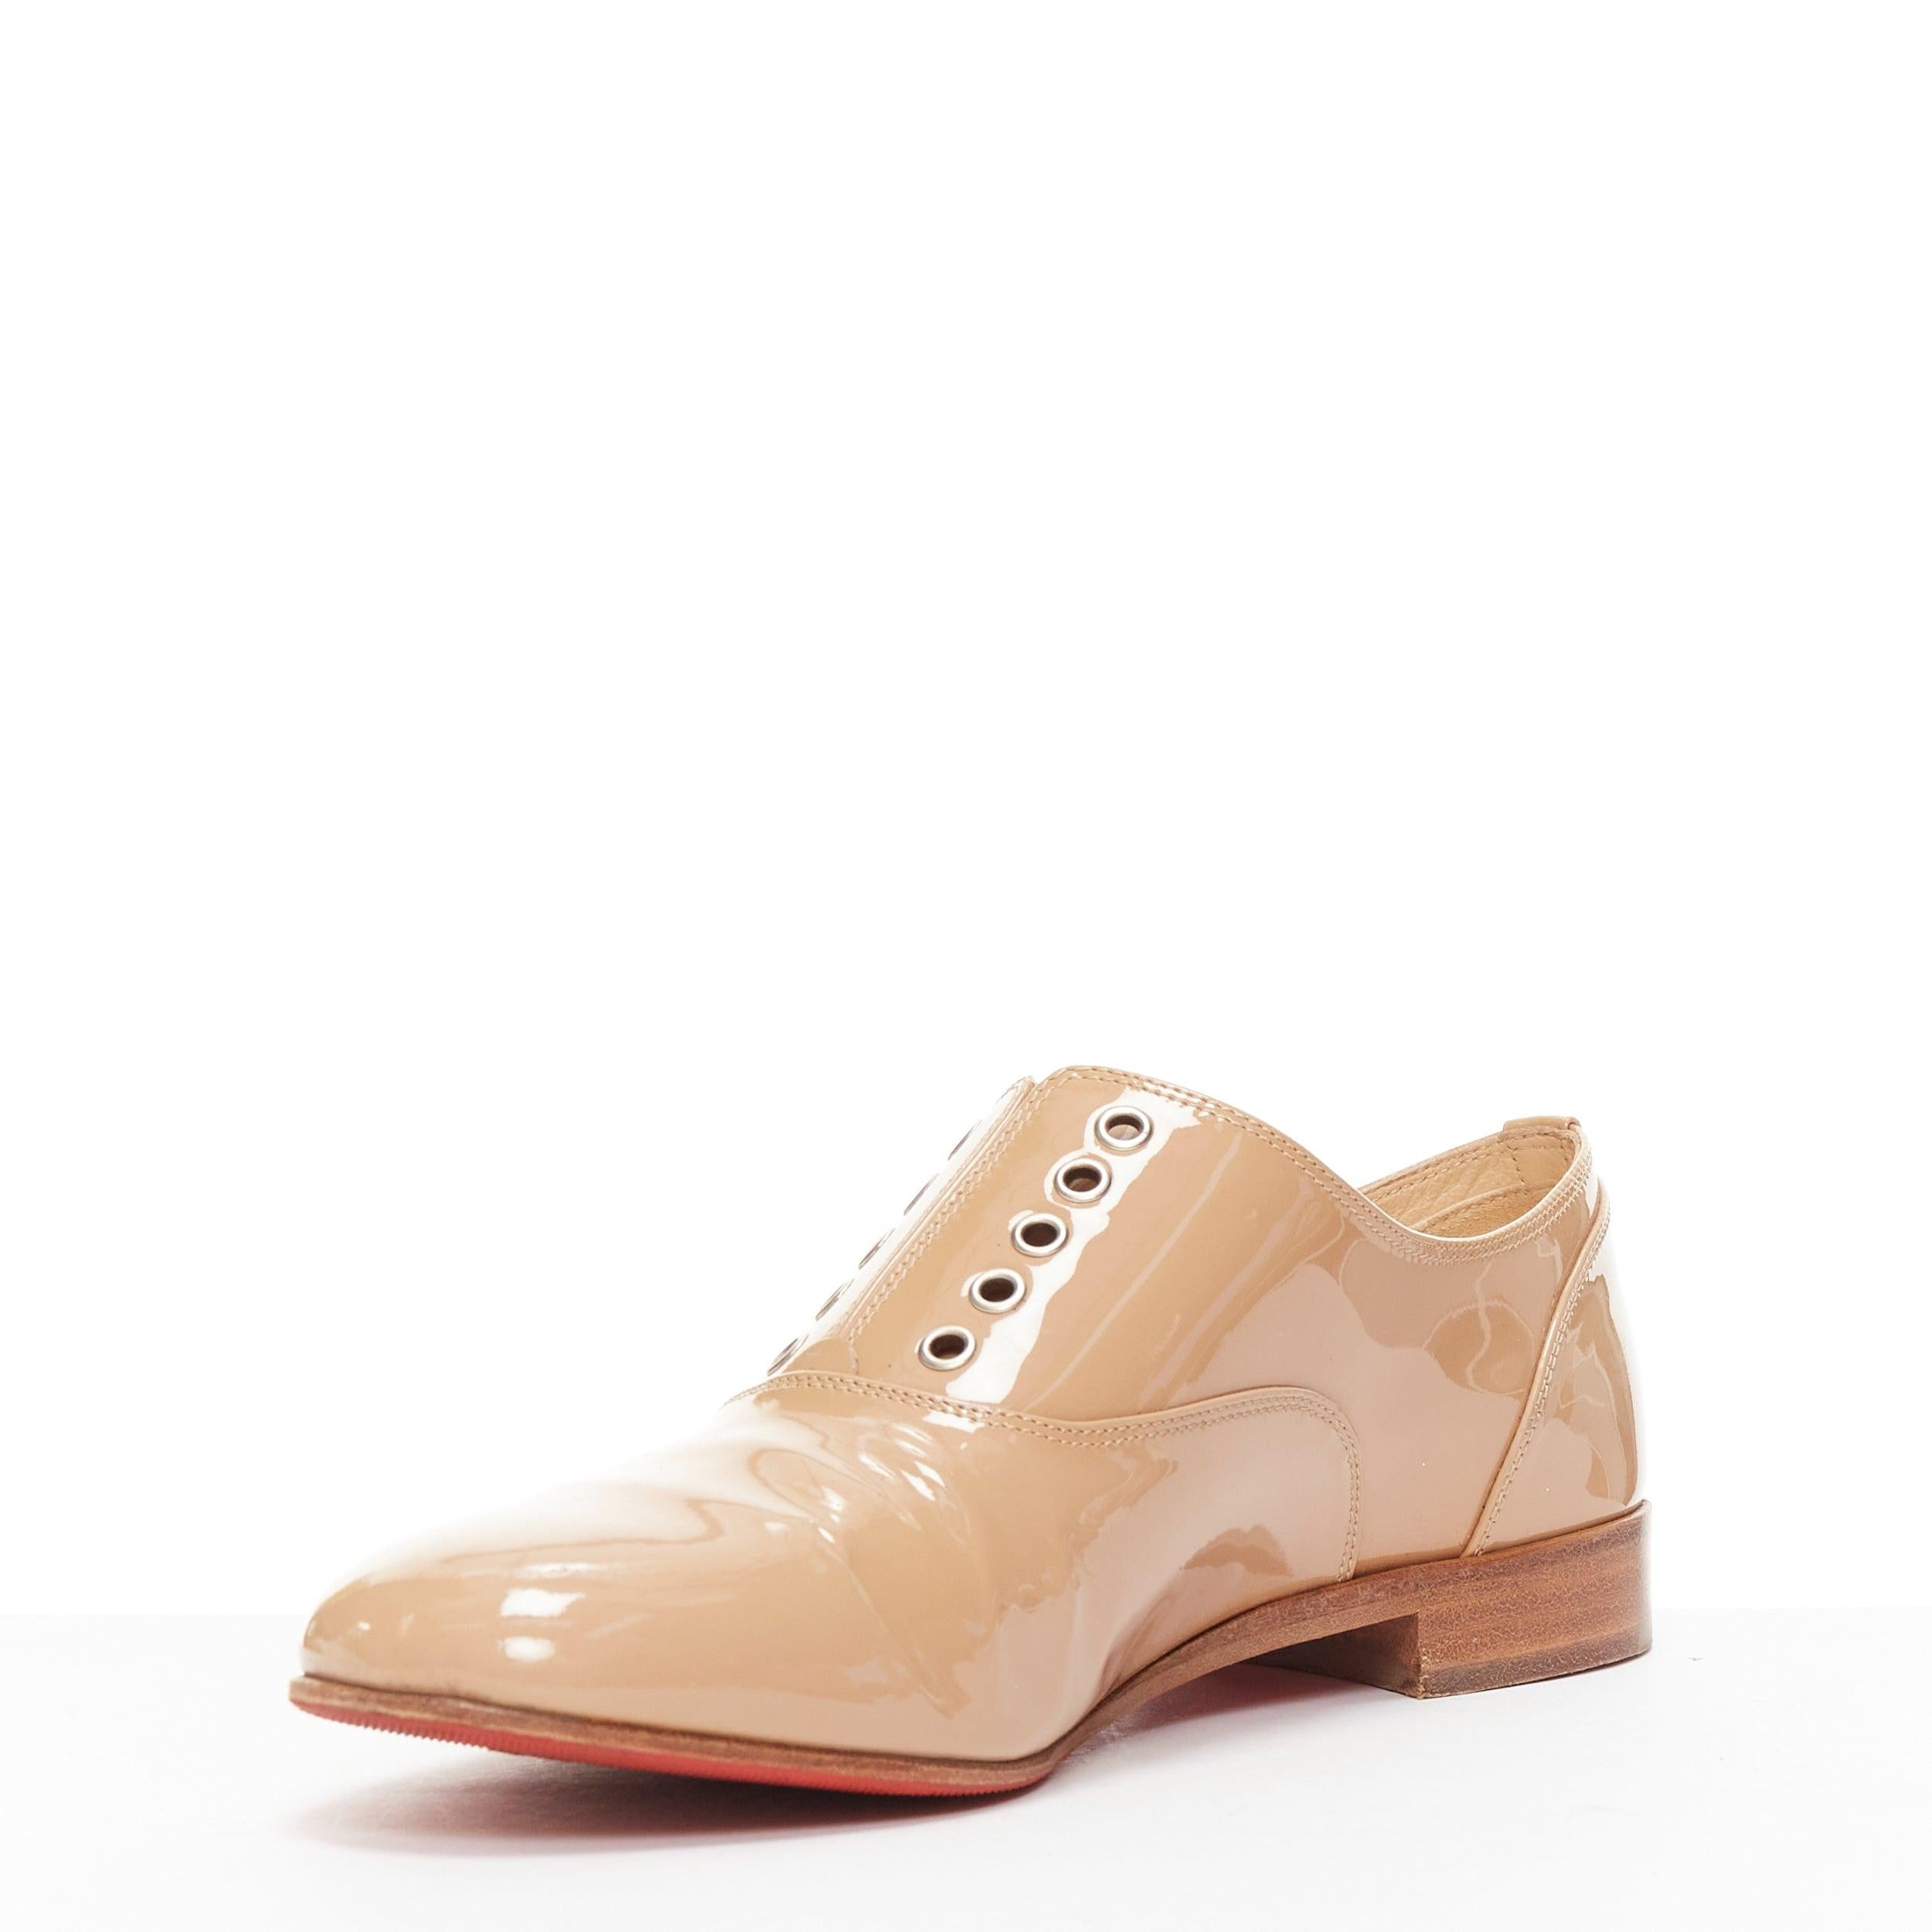 Women's CHRISTIAN LOUBOUTIN beige patent leather round toe derby flat shoes EU35.5 For Sale